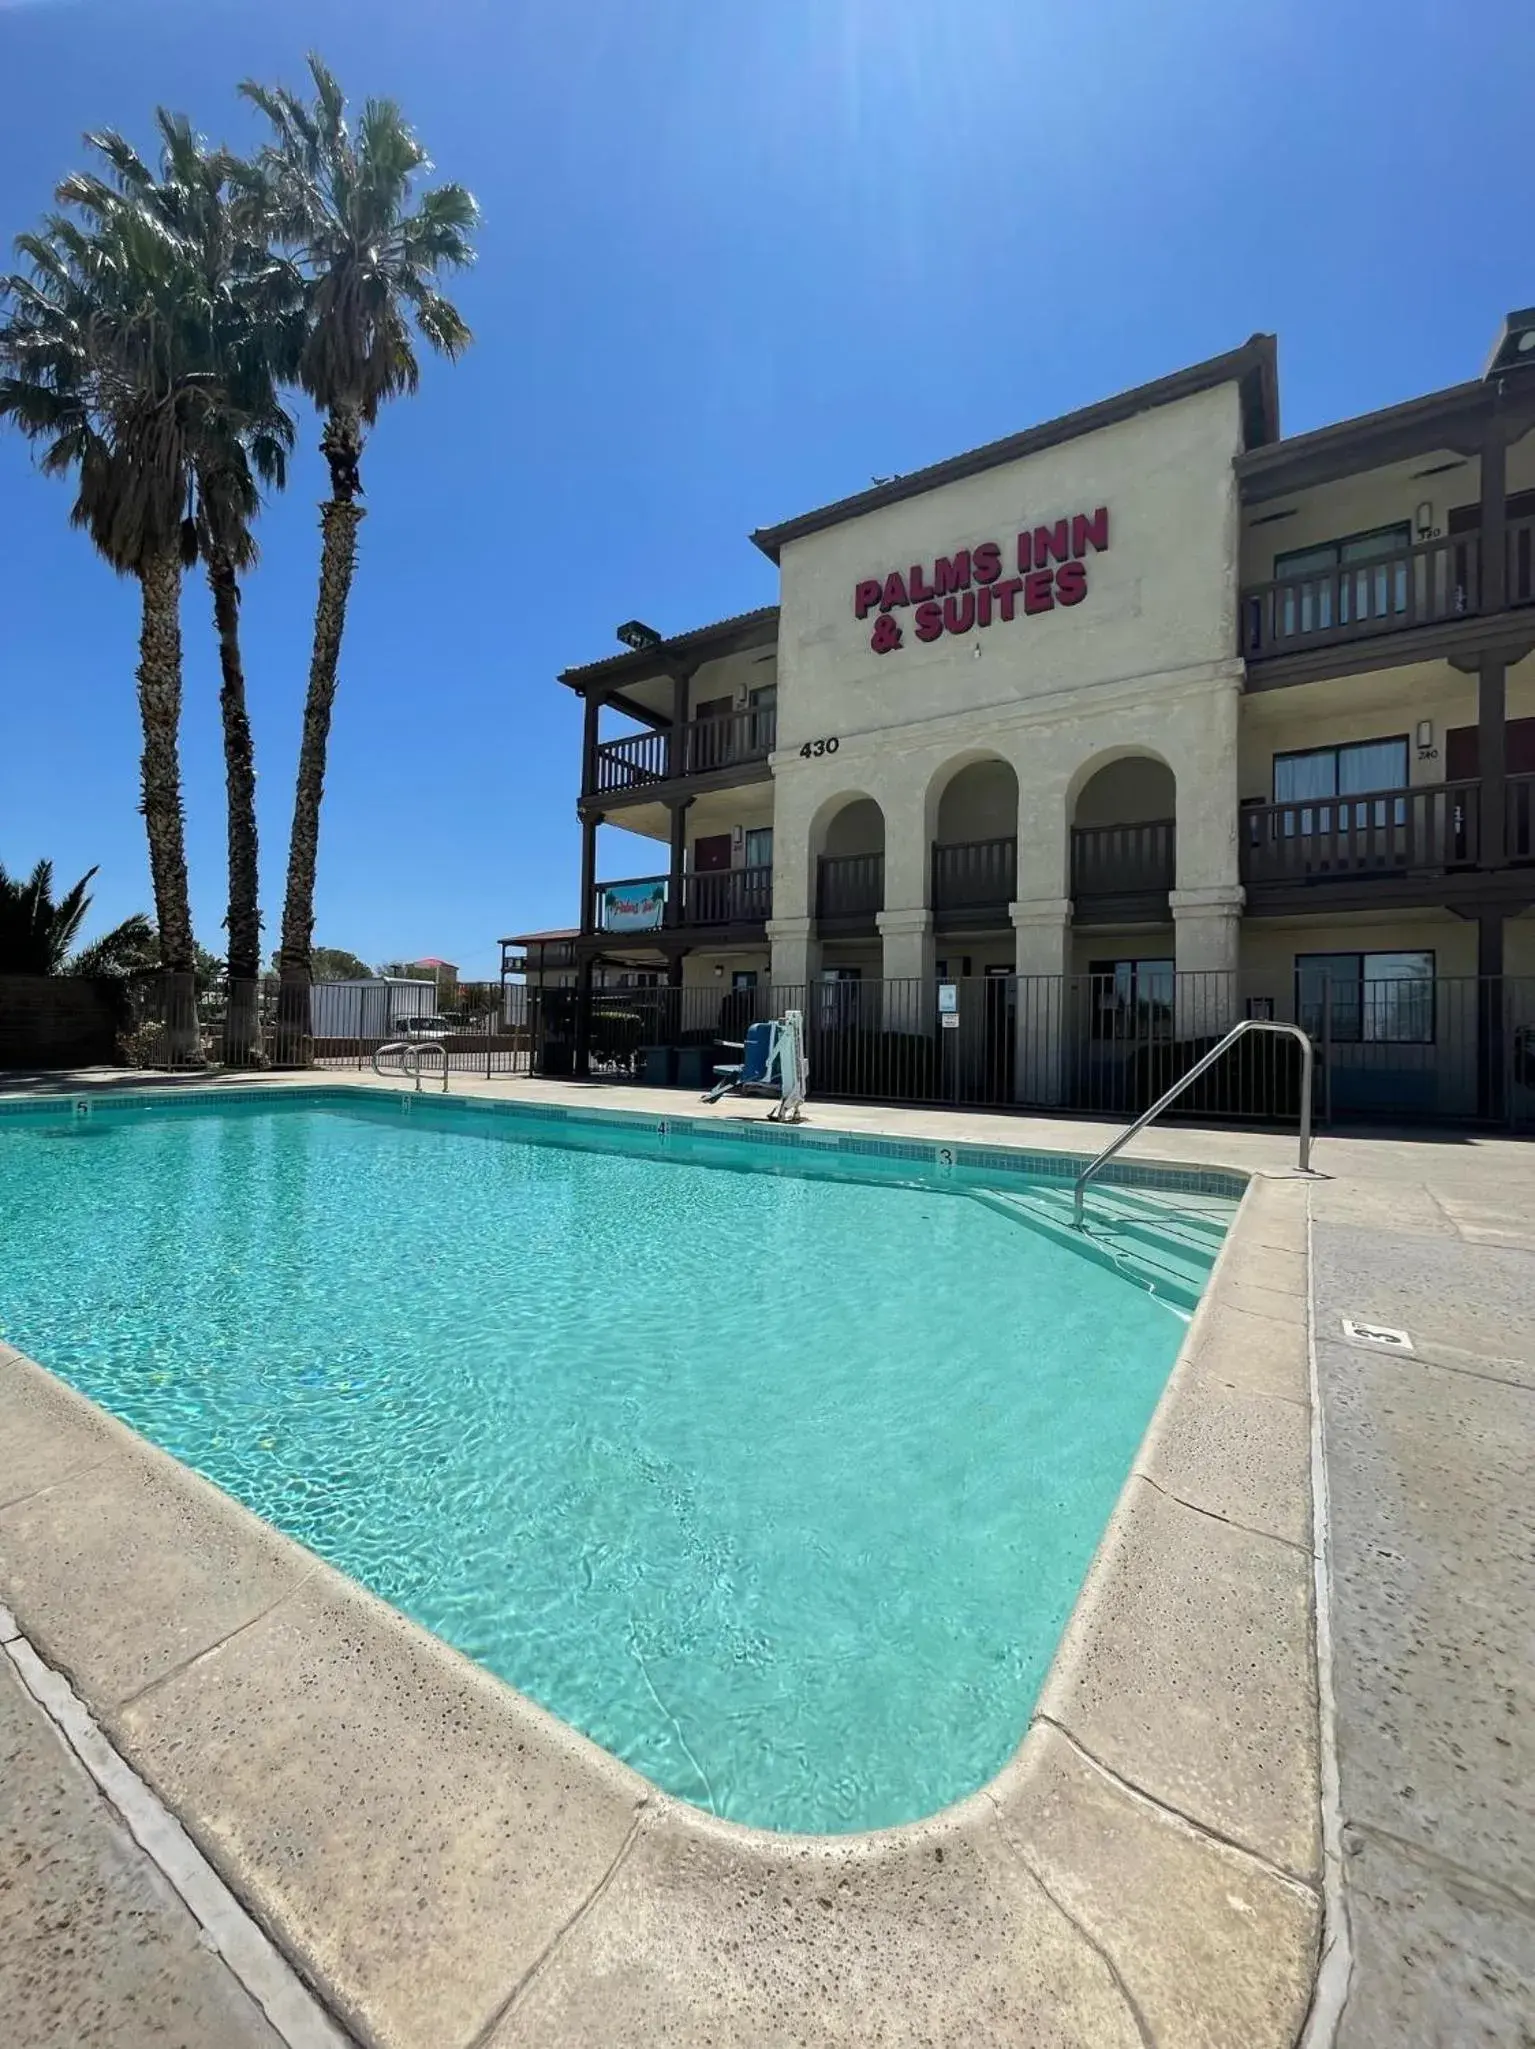 Property Building in Palms Inn & Suites